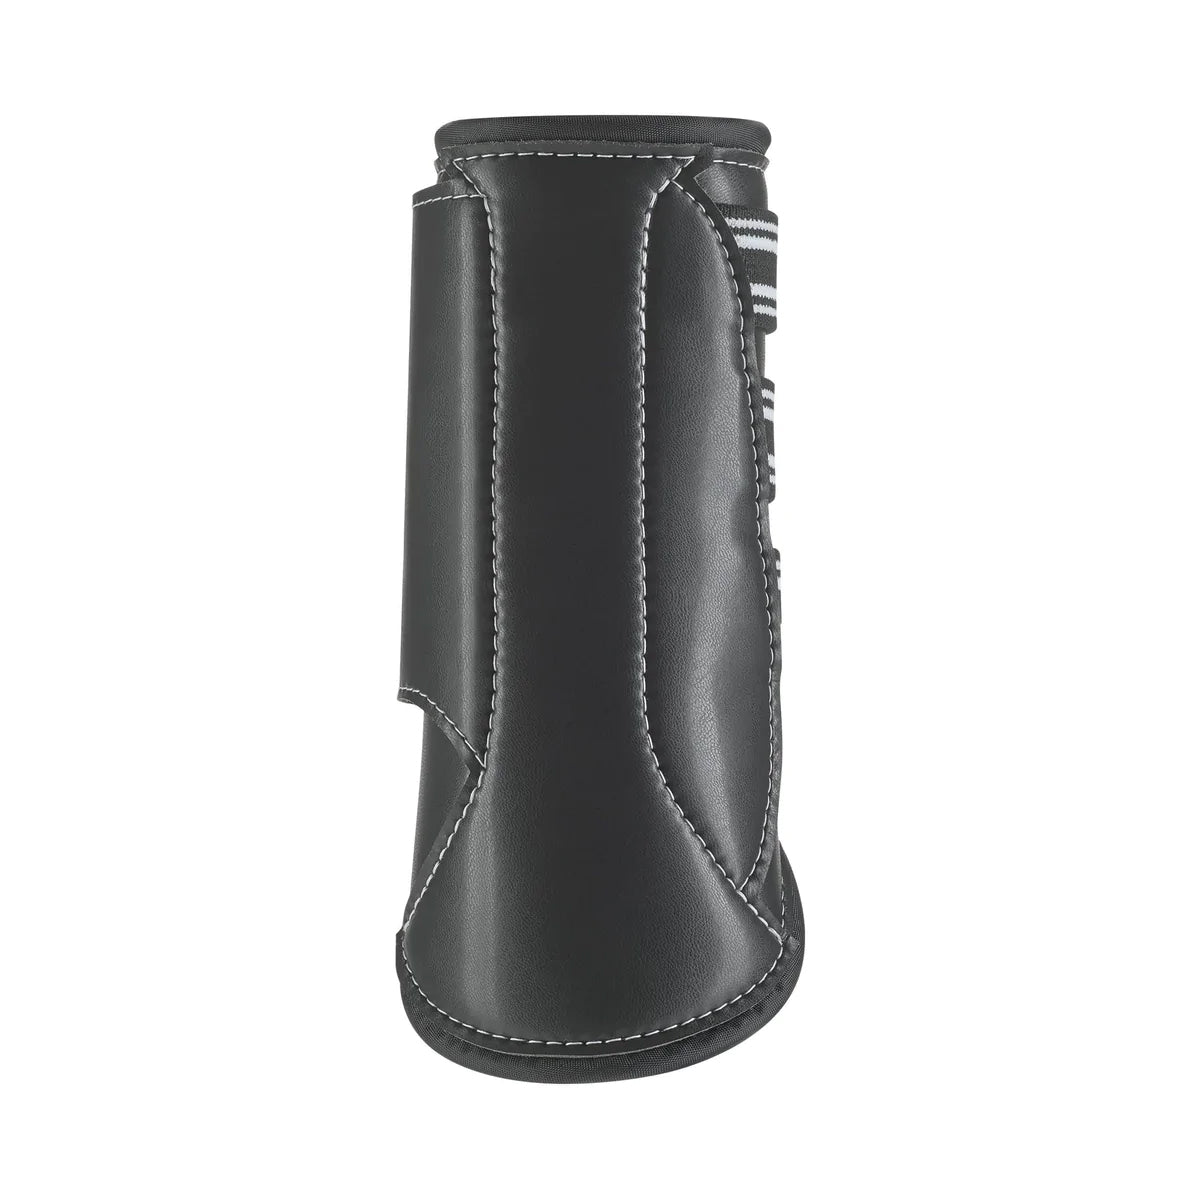 EquiFit MultiTeq Front Boot